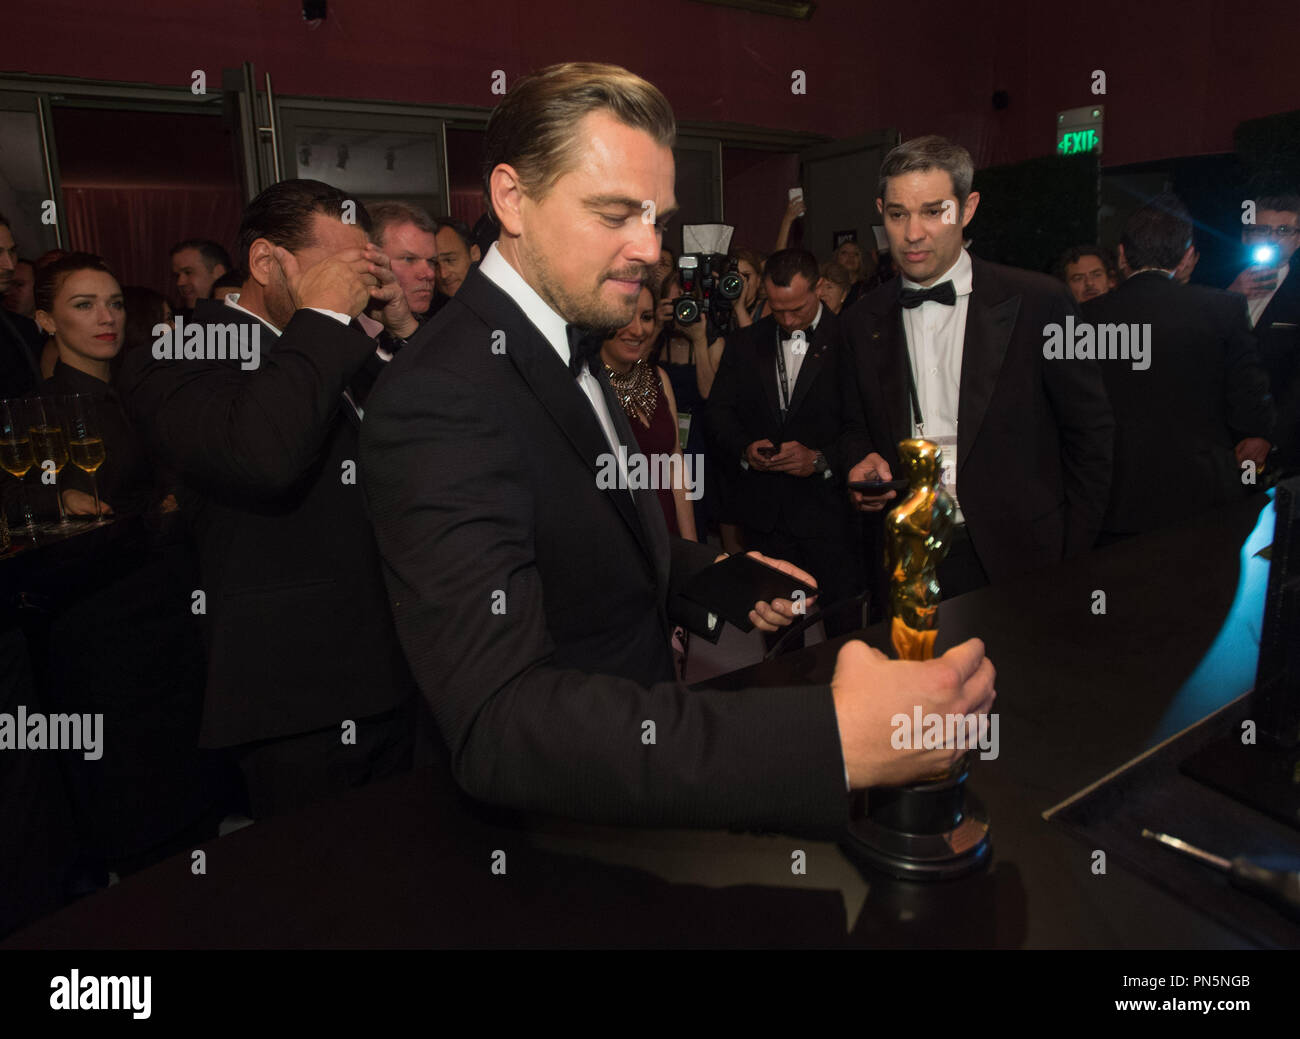 Oscar®-winner, Leonardo DiCaprio, at the Governors Ball following the live ABC Telecast of The 88th Oscars® at the Dolby® Theatre in Hollywood, CA on Sunday, February 28, 2016.  File Reference # 32854 838THA  For Editorial Use Only -  All Rights Reserved Stock Photo